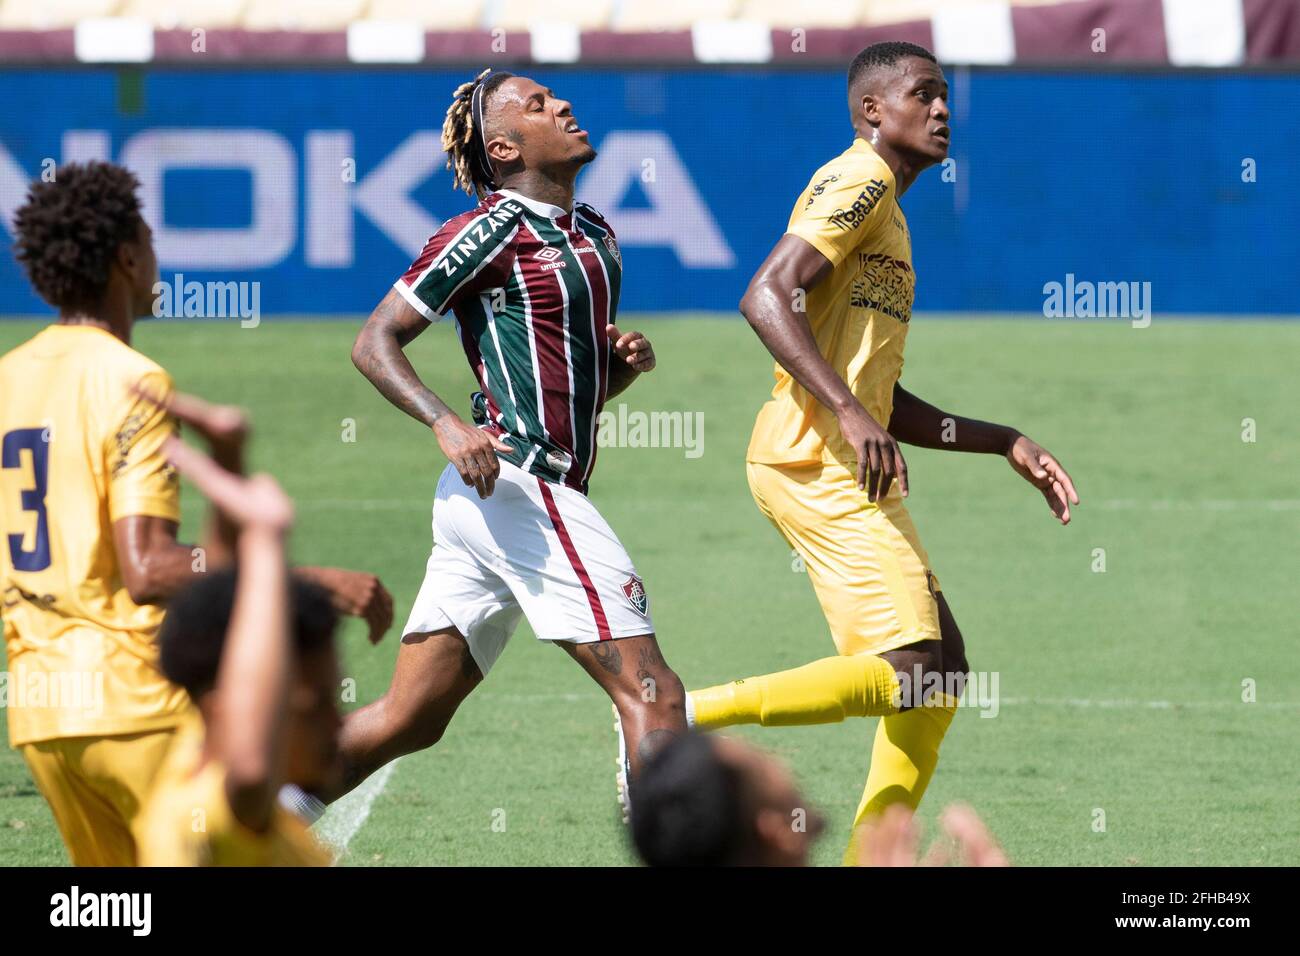 Rio De Janeiro, Brazil. 25th Apr, 2021. Abel Hernandez during Fluminense x Madureira, a match valid for the 11th round of the 2021 Carioca Championship, held at Maracanã stadium, located in the city of Rio de Janeiro, this Sunday morning (25). Credit: Celso Pupo/FotoArena/Alamy Live News Stock Photo